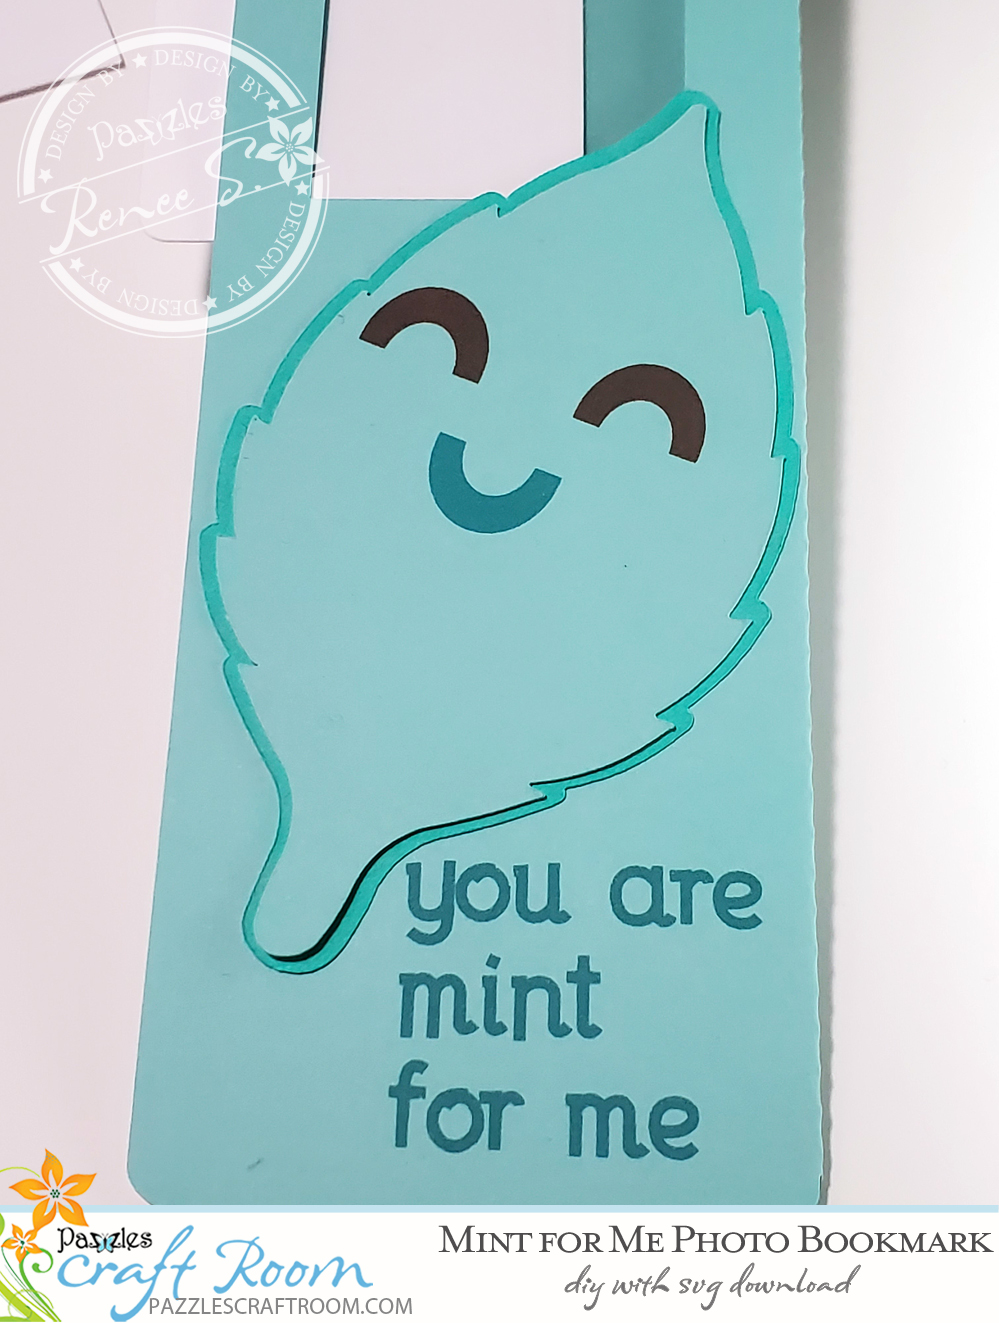 Pazzles DIY Mint for Me Photo Bookmark with instant SVG download. Instant SVG download compatible with all major electronic cutters including Pazzles Inspiration, Cricut, and Silhouette Cameo. Design by Renee Smart.